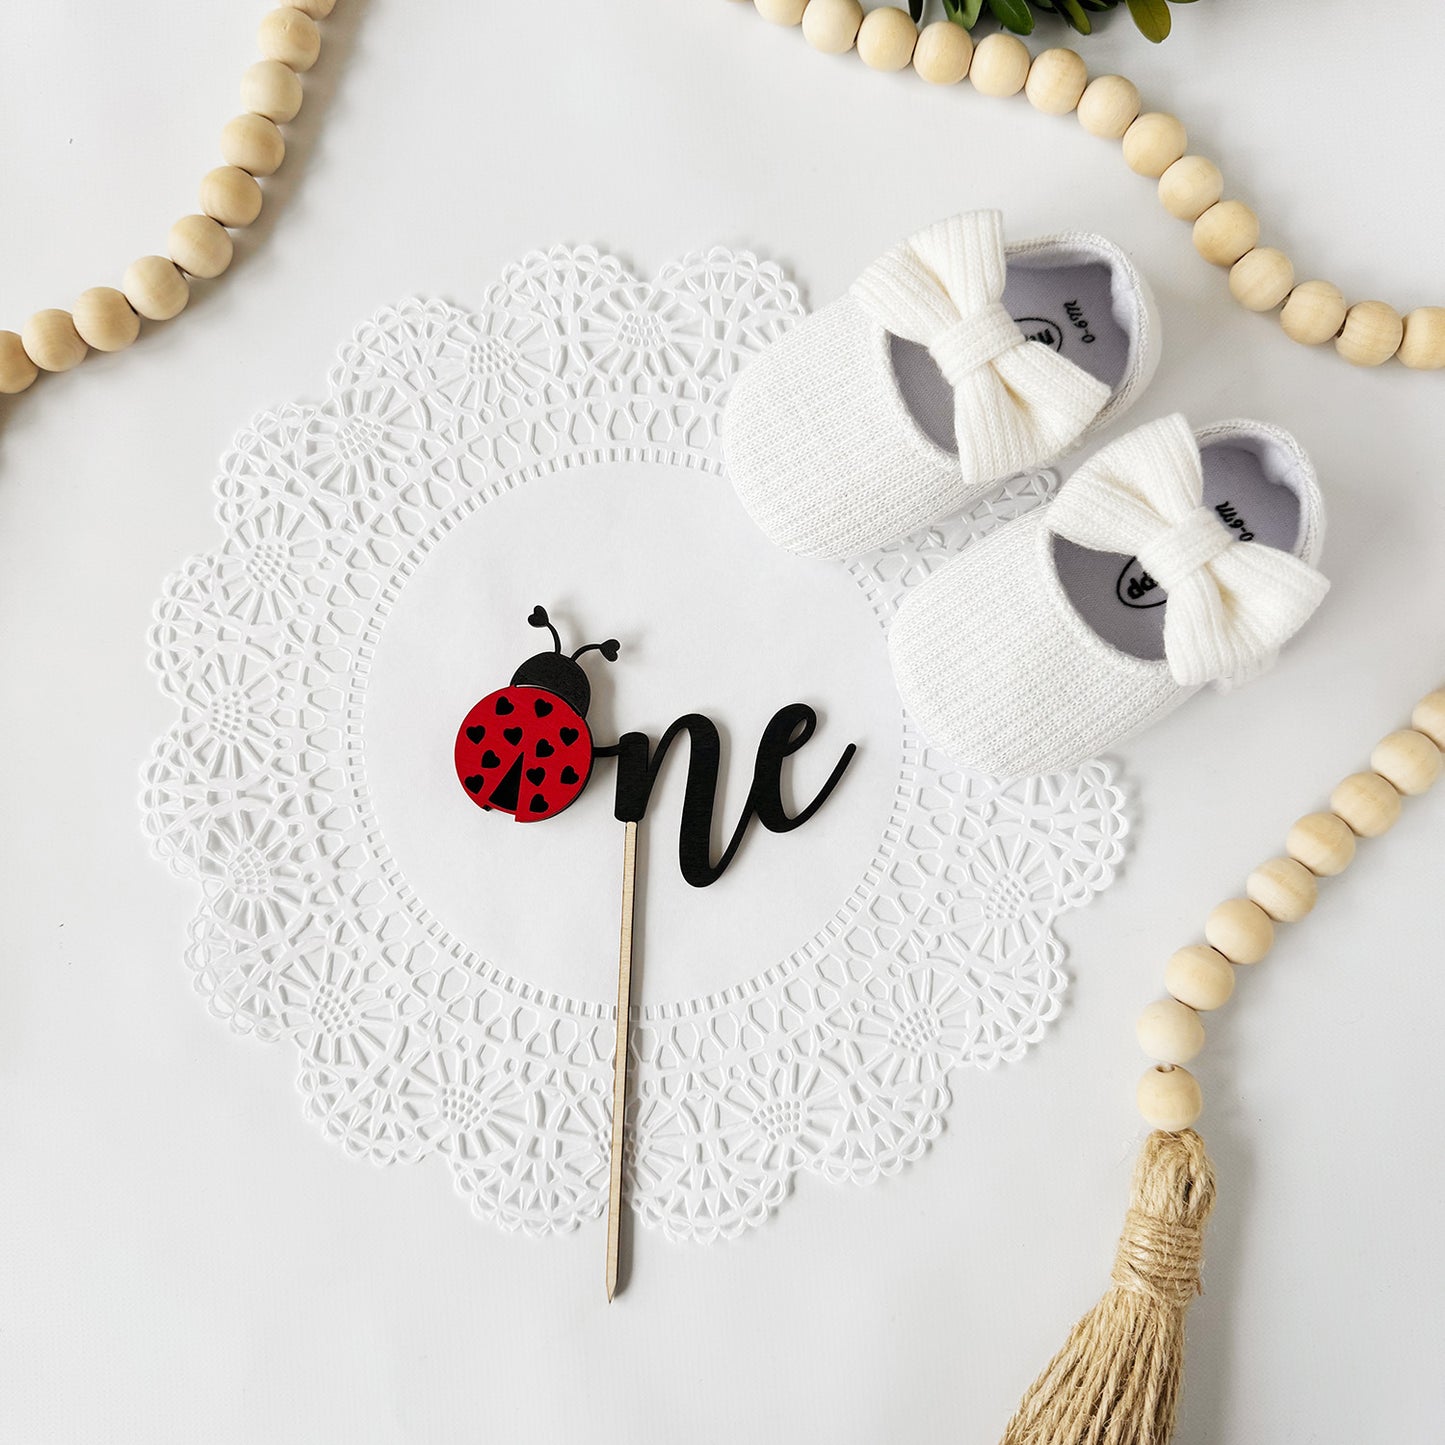 Beautiful Cursive Cake Topper for Baby's First Birthday with Adorable Ladybug (Set of 4)